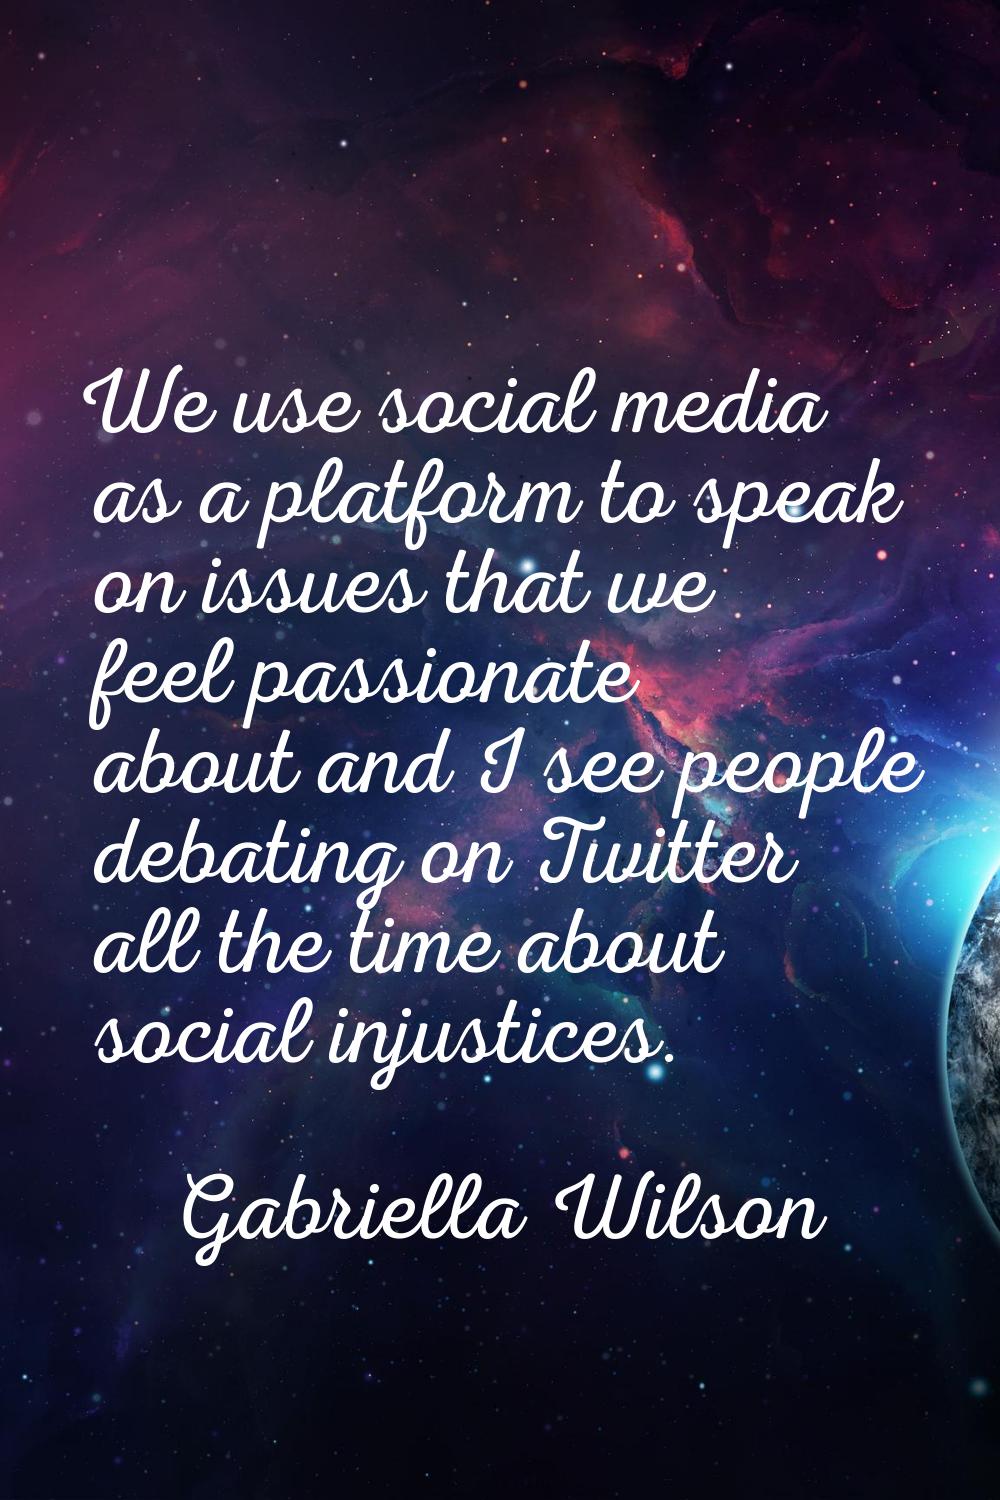 We use social media as a platform to speak on issues that we feel passionate about and I see people